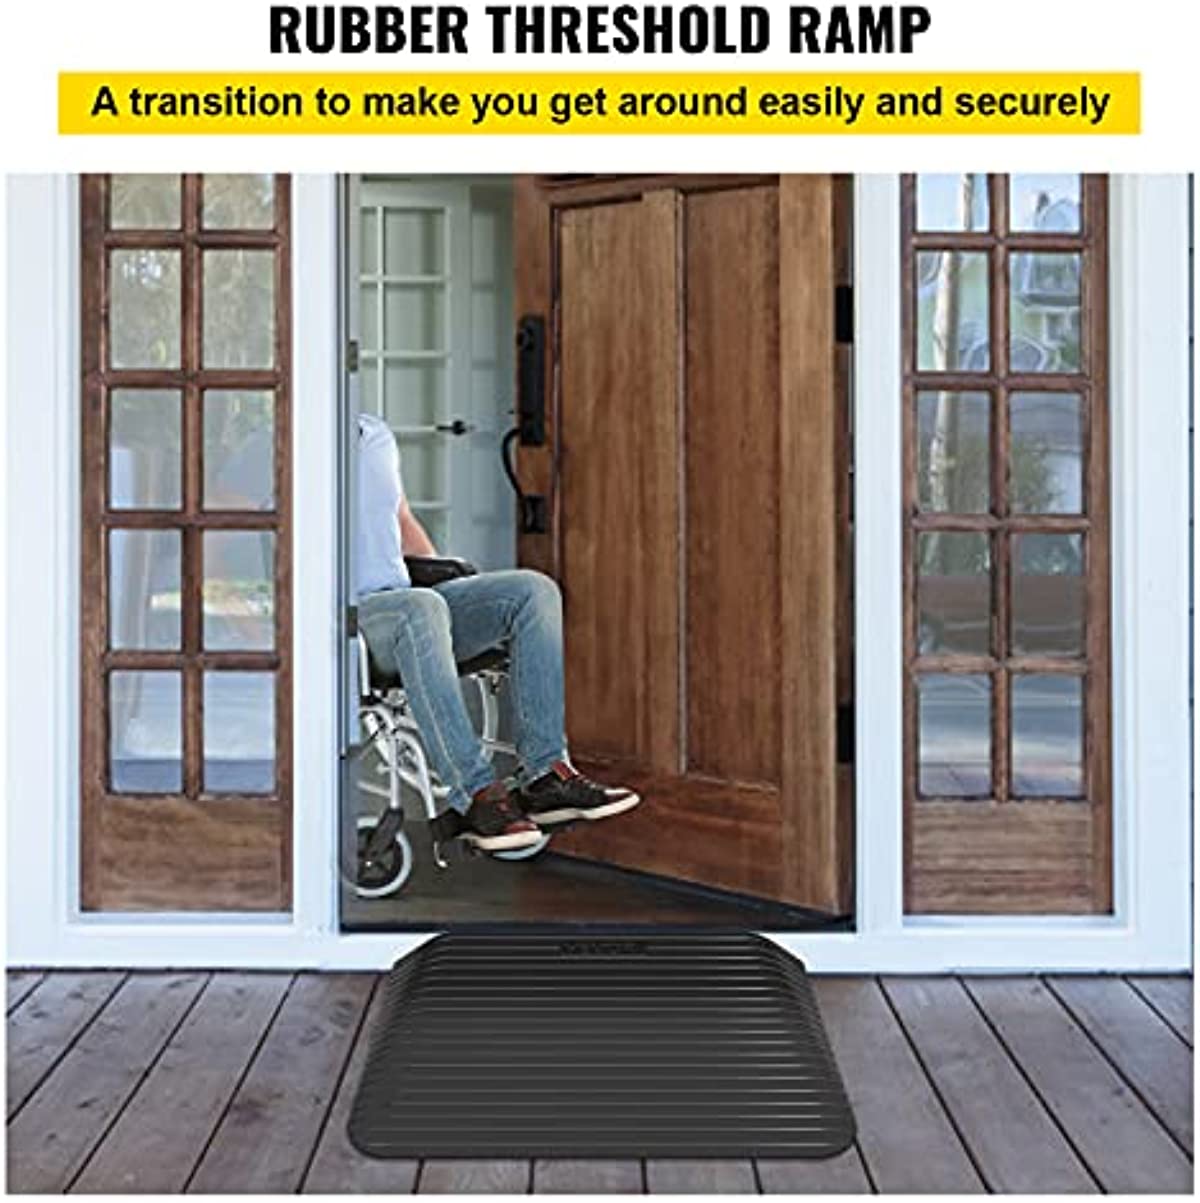 VEVOR Rubber Threshold Ramp, 4\" Rise Threshold Ramp Doorway, Recycled Rubber Power Threshold Ramp Rated 2200 Lbs Load Capacity, Non-Slip Surface Rubber Solid Threshold Ramp for Wheelchair and Scooter